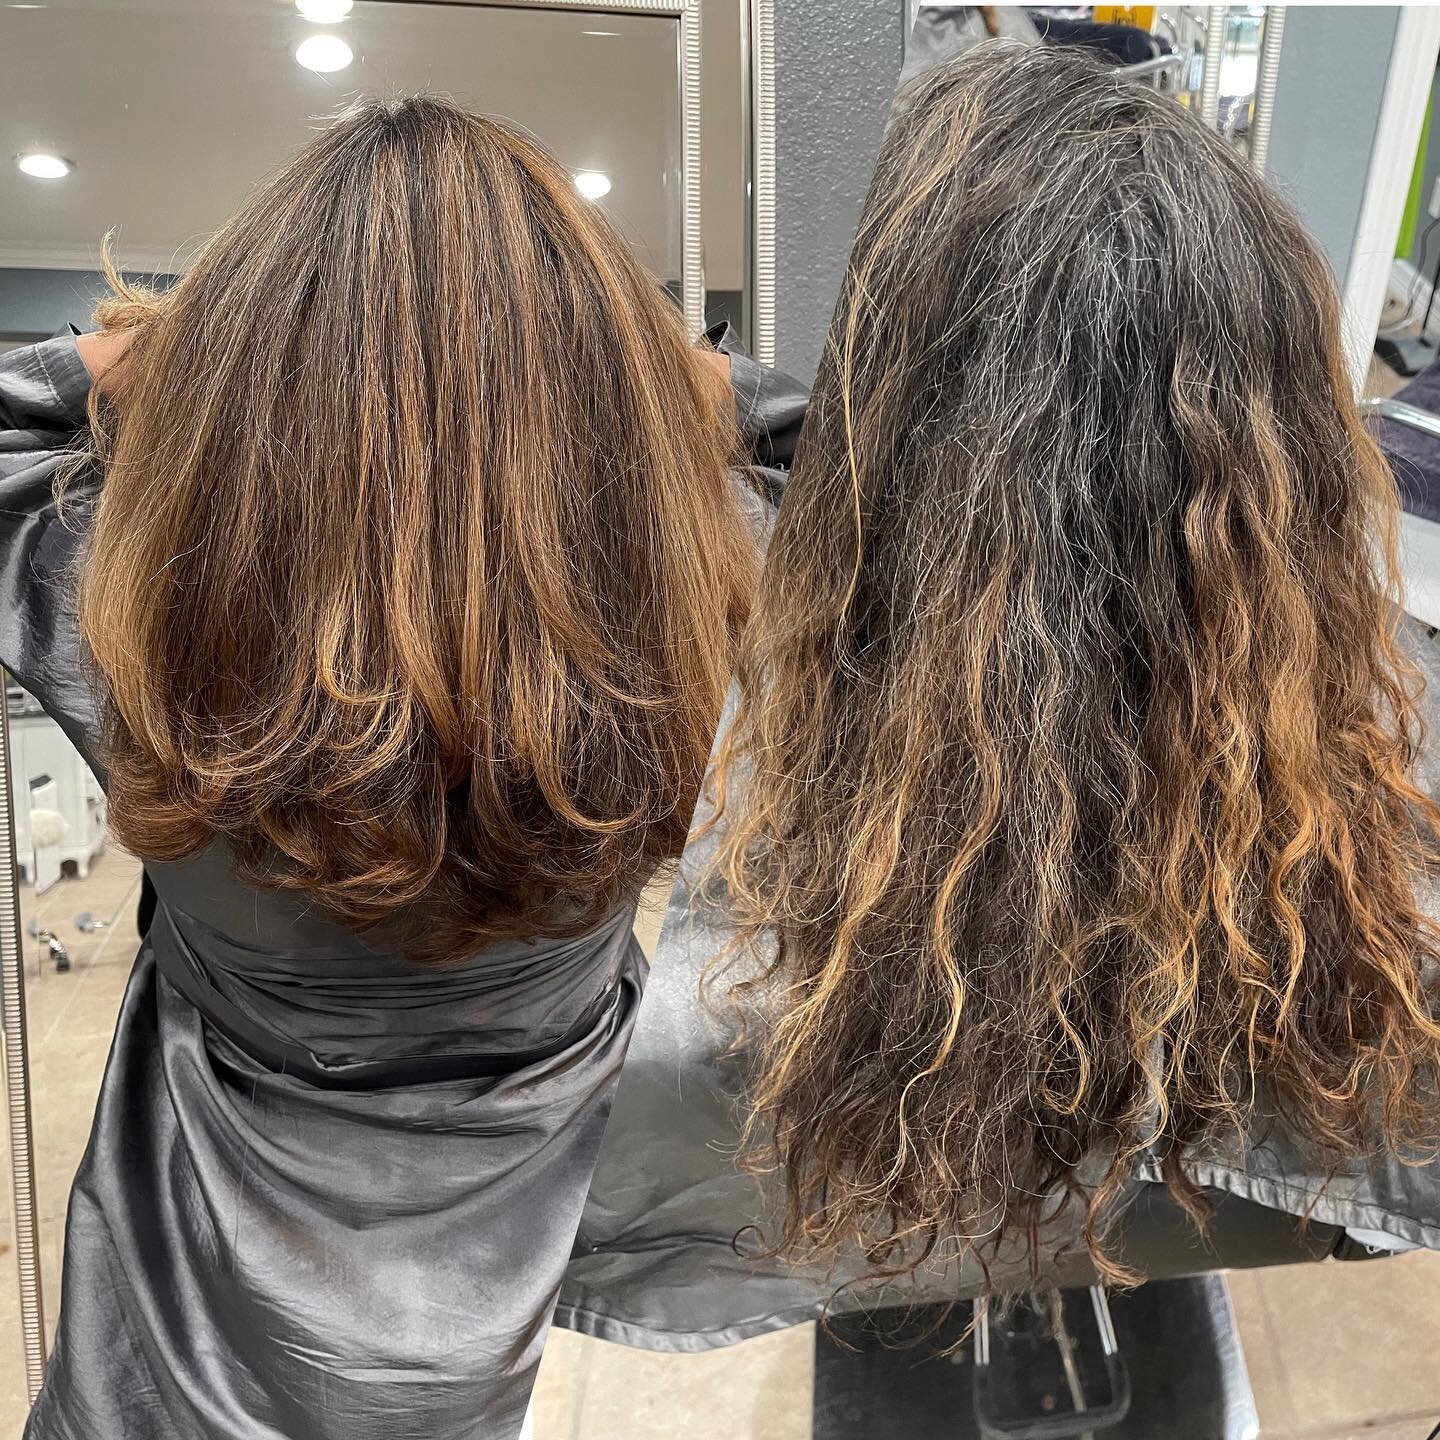 This client of mine came for color and didn&rsquo;t do her color for long time and, what a make over she loved loved it ! ❤️❤️❤️

#roundrocktx #roundrock #roundrockhairstylist #hairstylist #colorhairstyle #highlightshair #austinhairstylist #austinhai